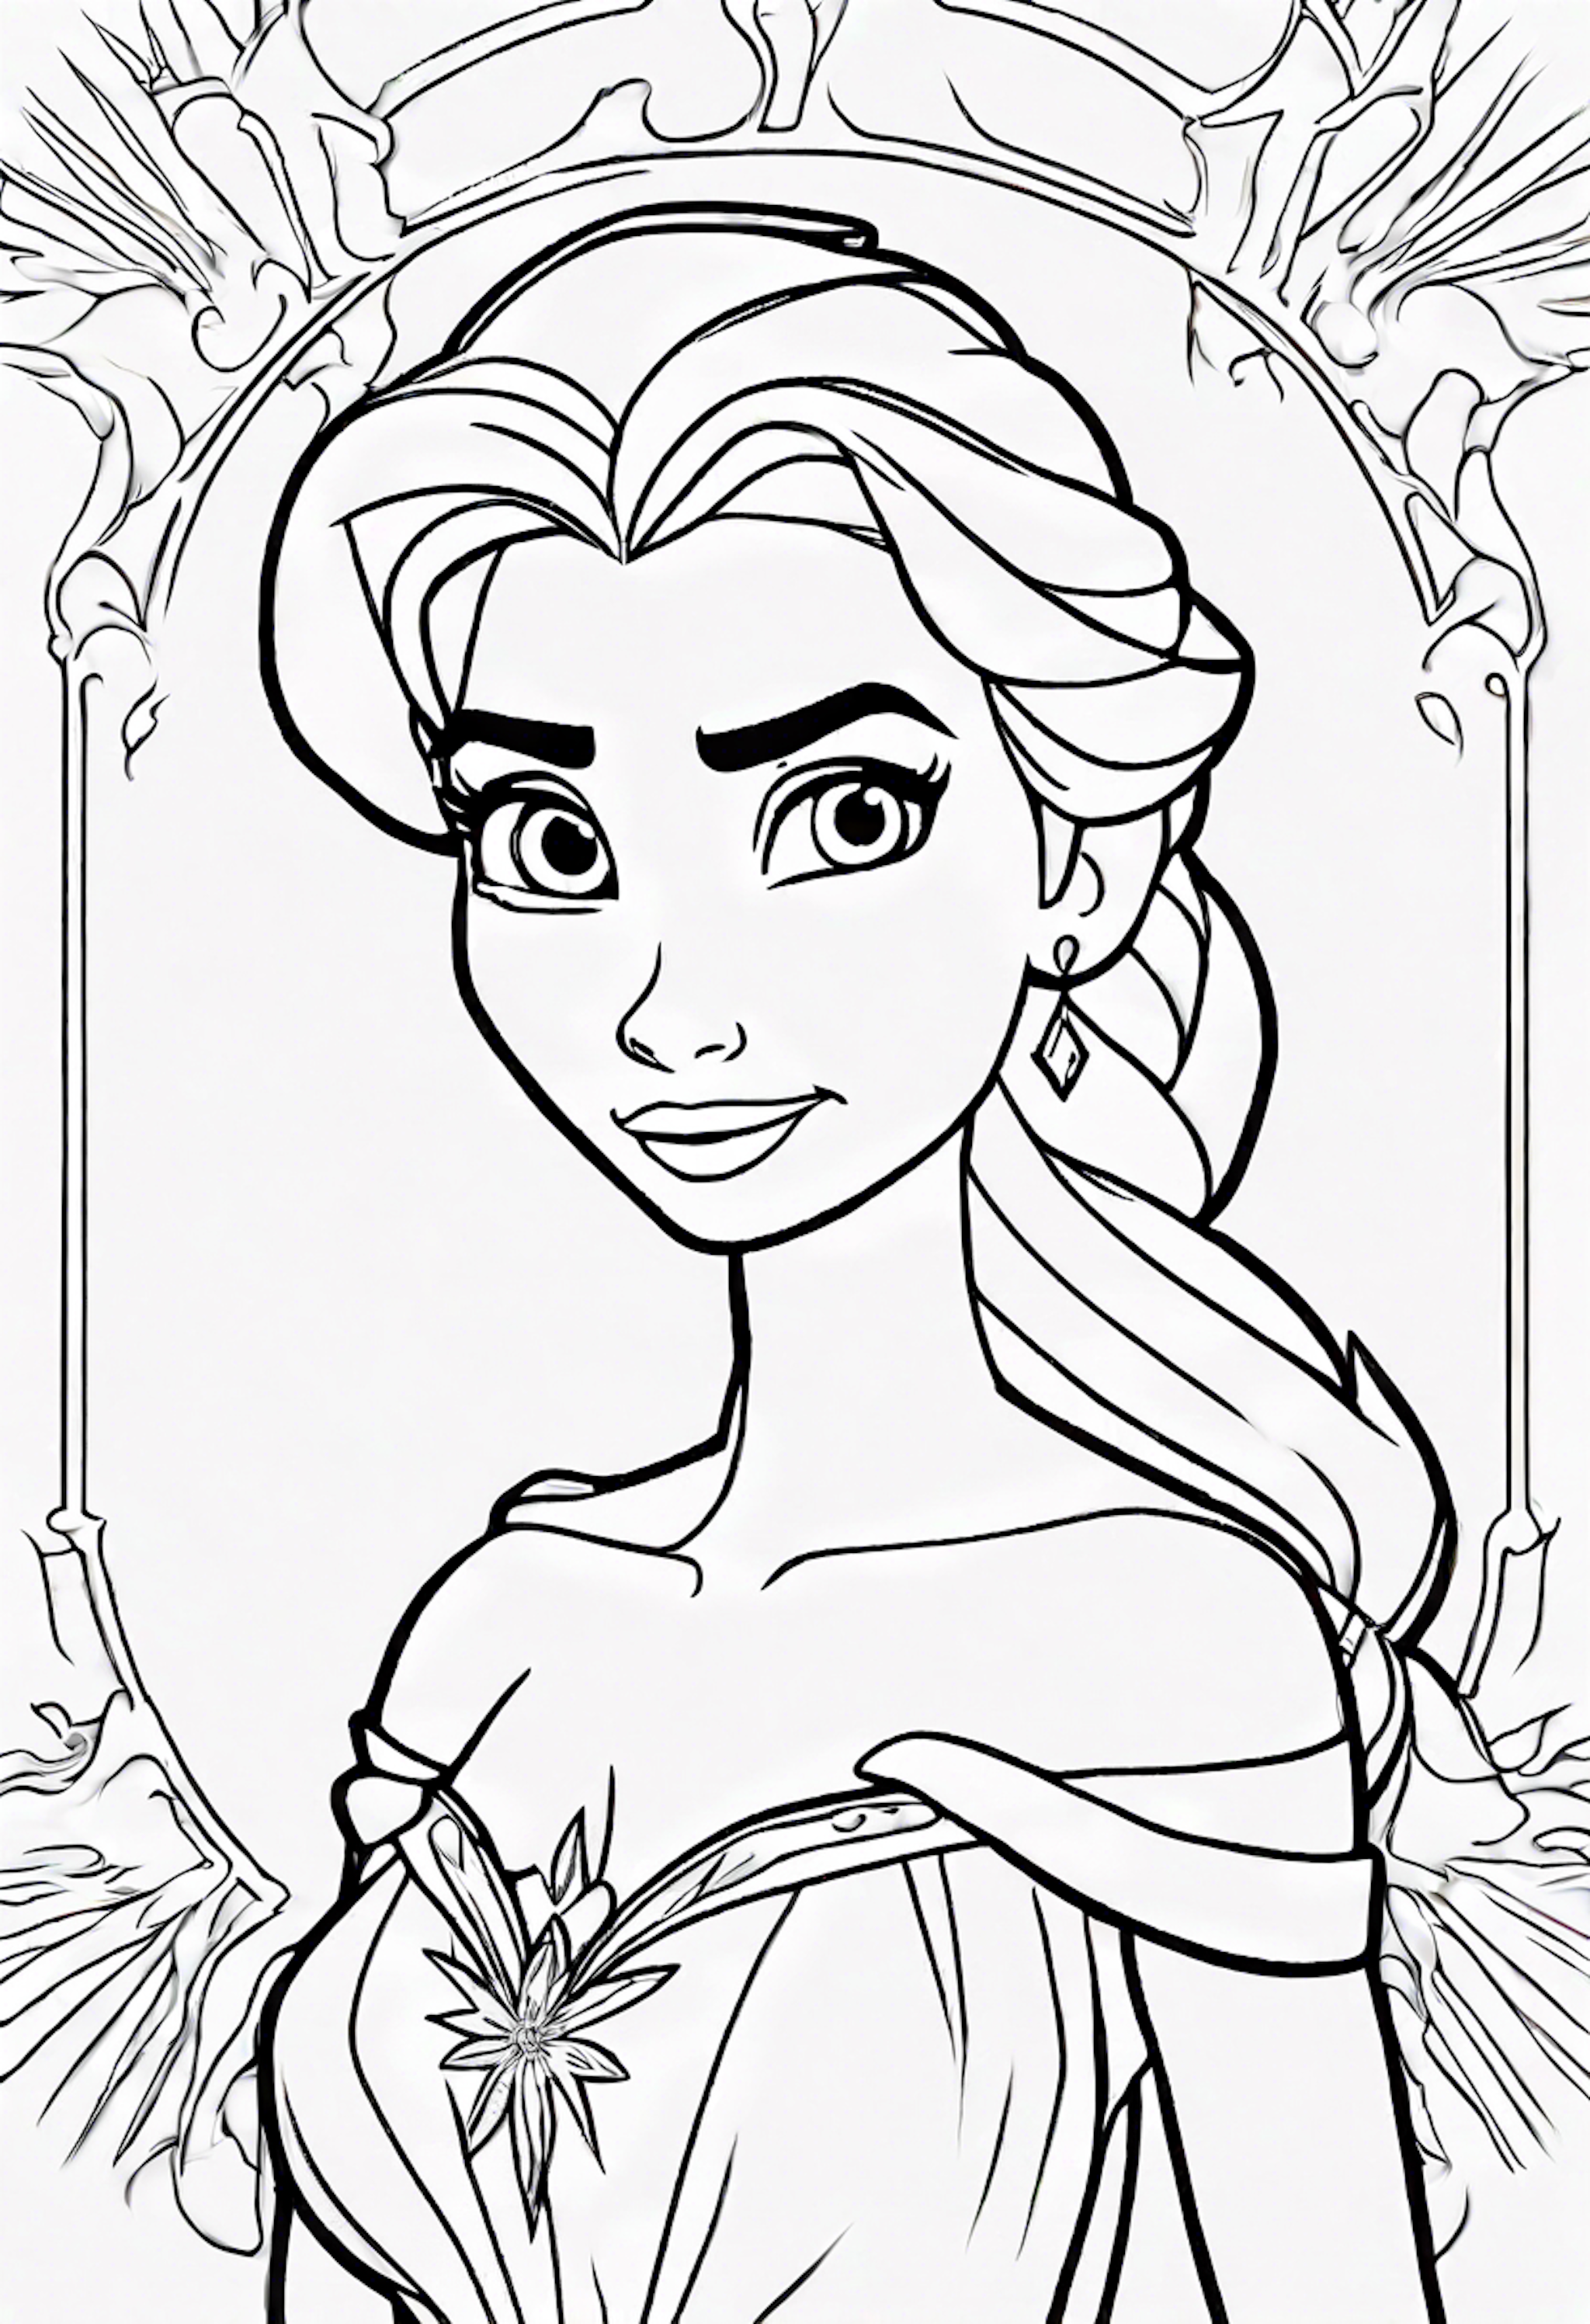 A coloring page for 6 Elsa coloring pages